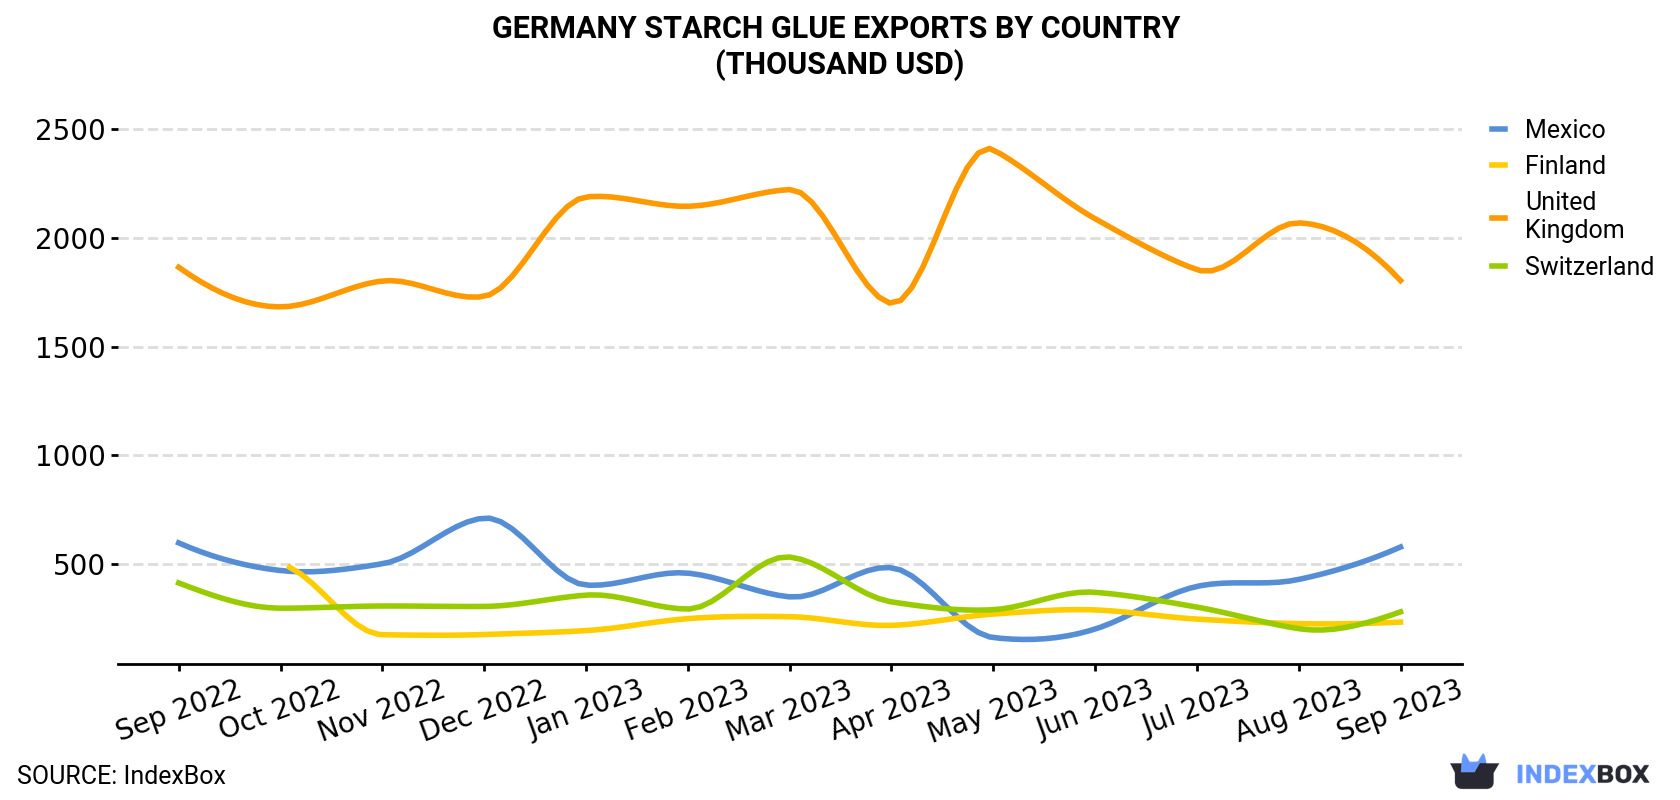 Germany Starch Glue Exports By Country (Thousand USD)